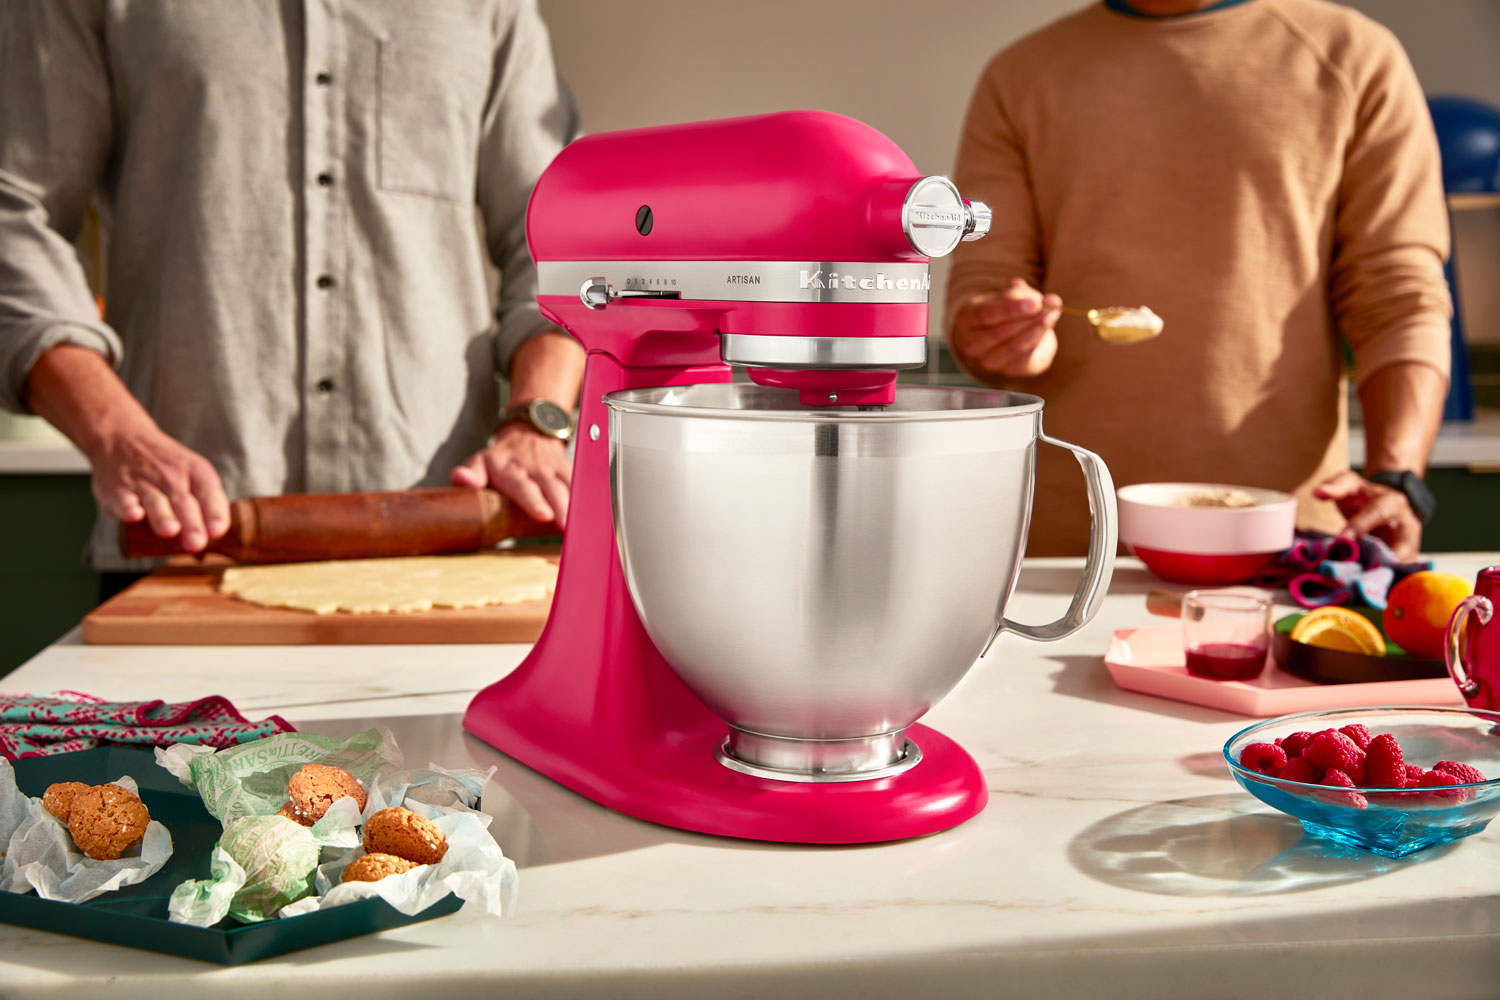 Designing Optimism with KitchenAid Brand Color of the Year 'Hibiscus